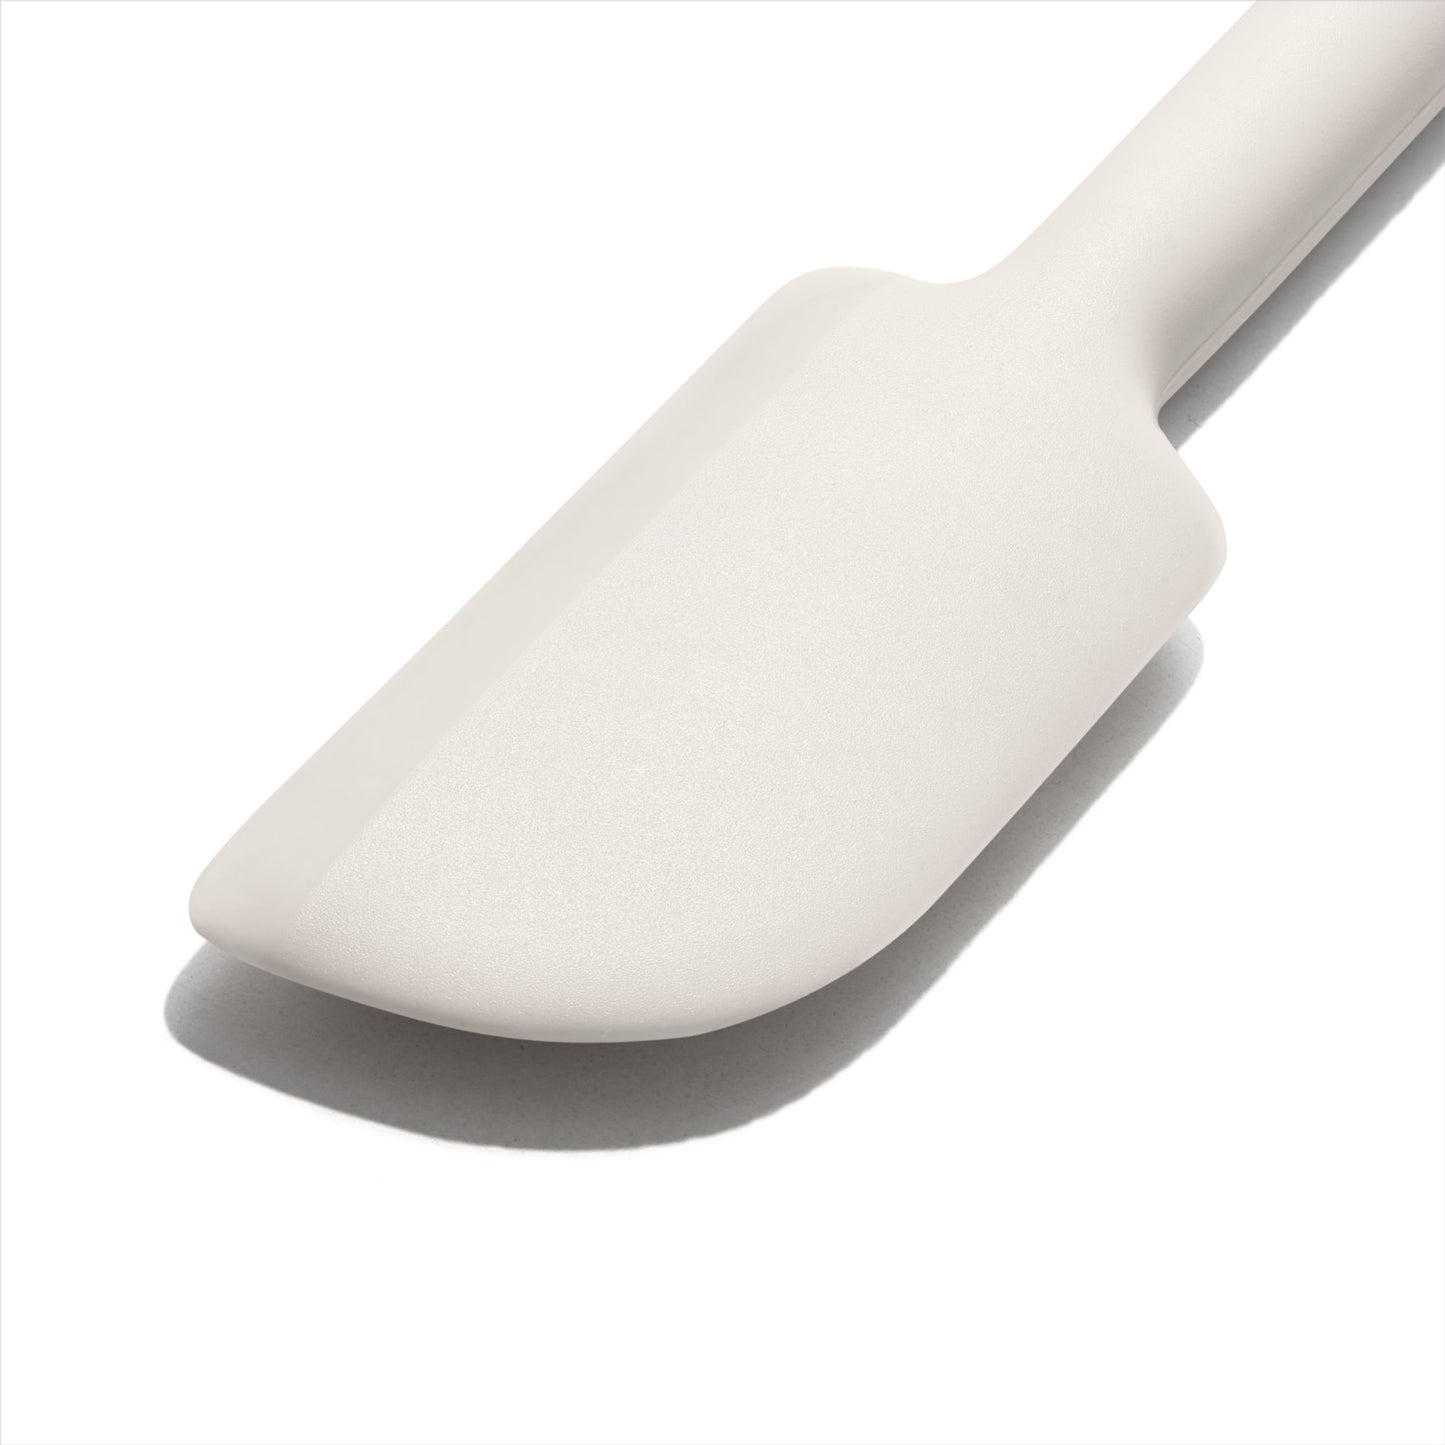  OXO Good Grips Silicone Jar Spatula - Oat: Home & Kitchen